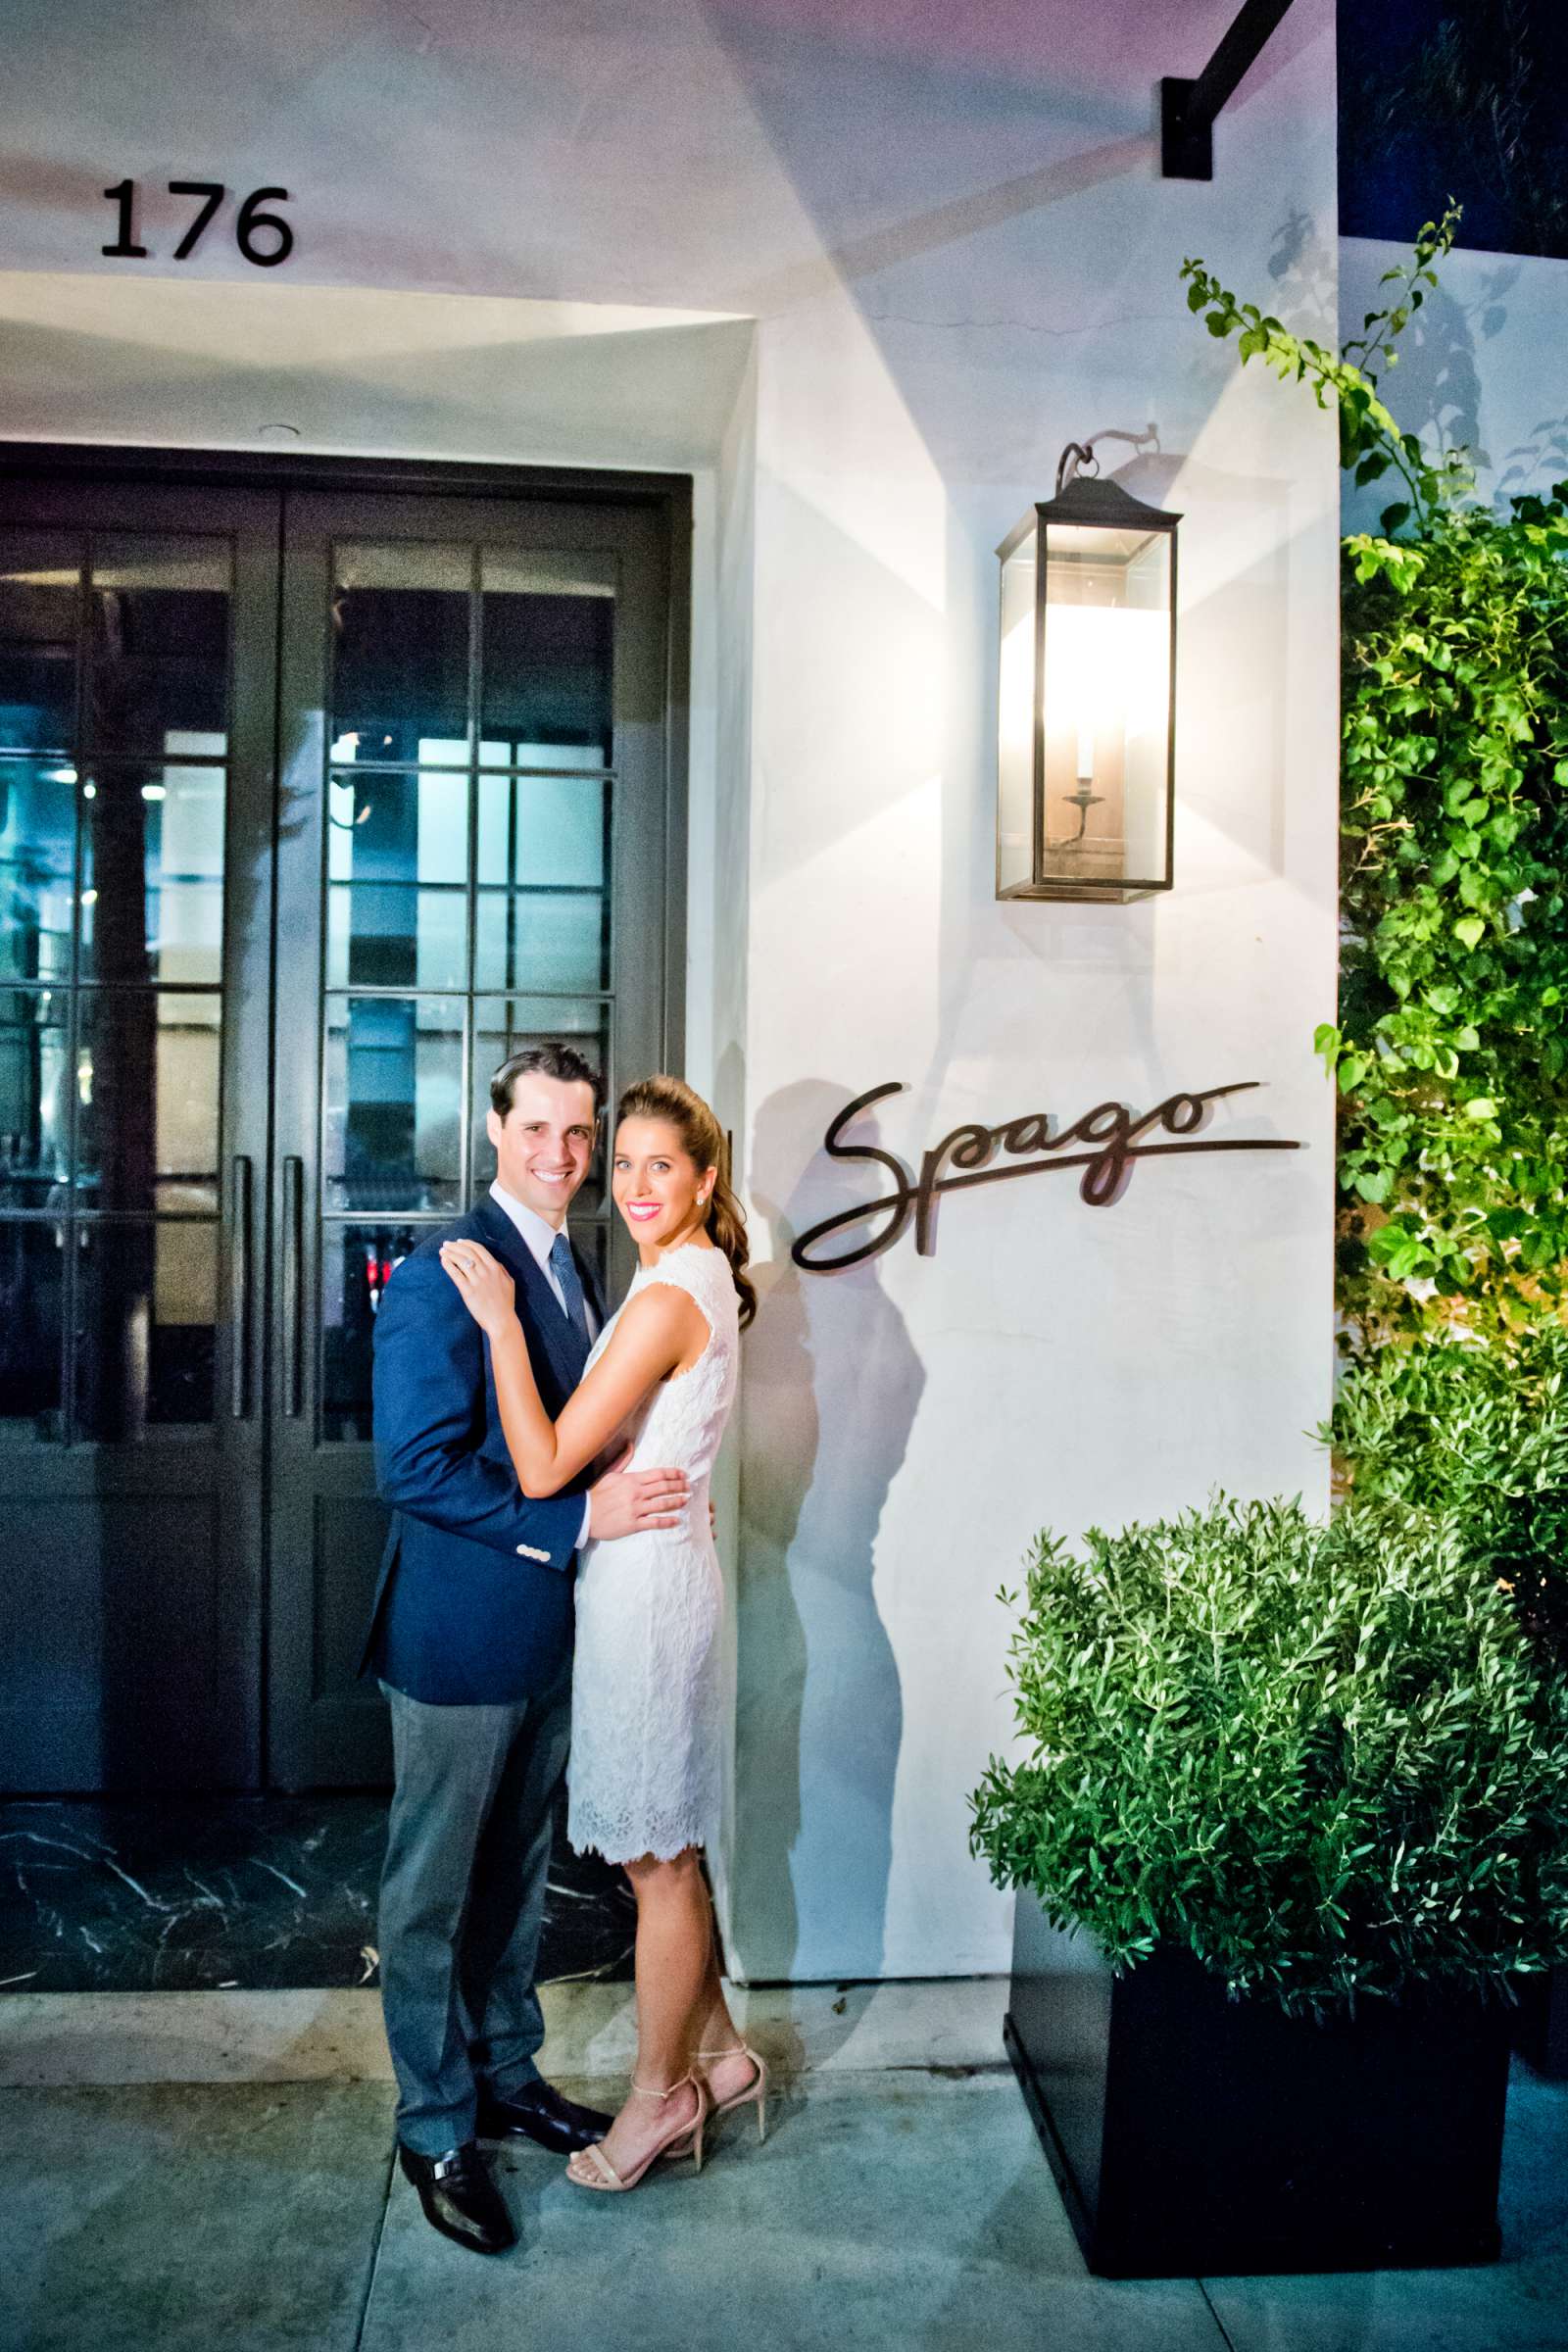 Spago Wedding coordinated by Pryor Events, A Fun Day One Wedding Photo #33 by True Photography